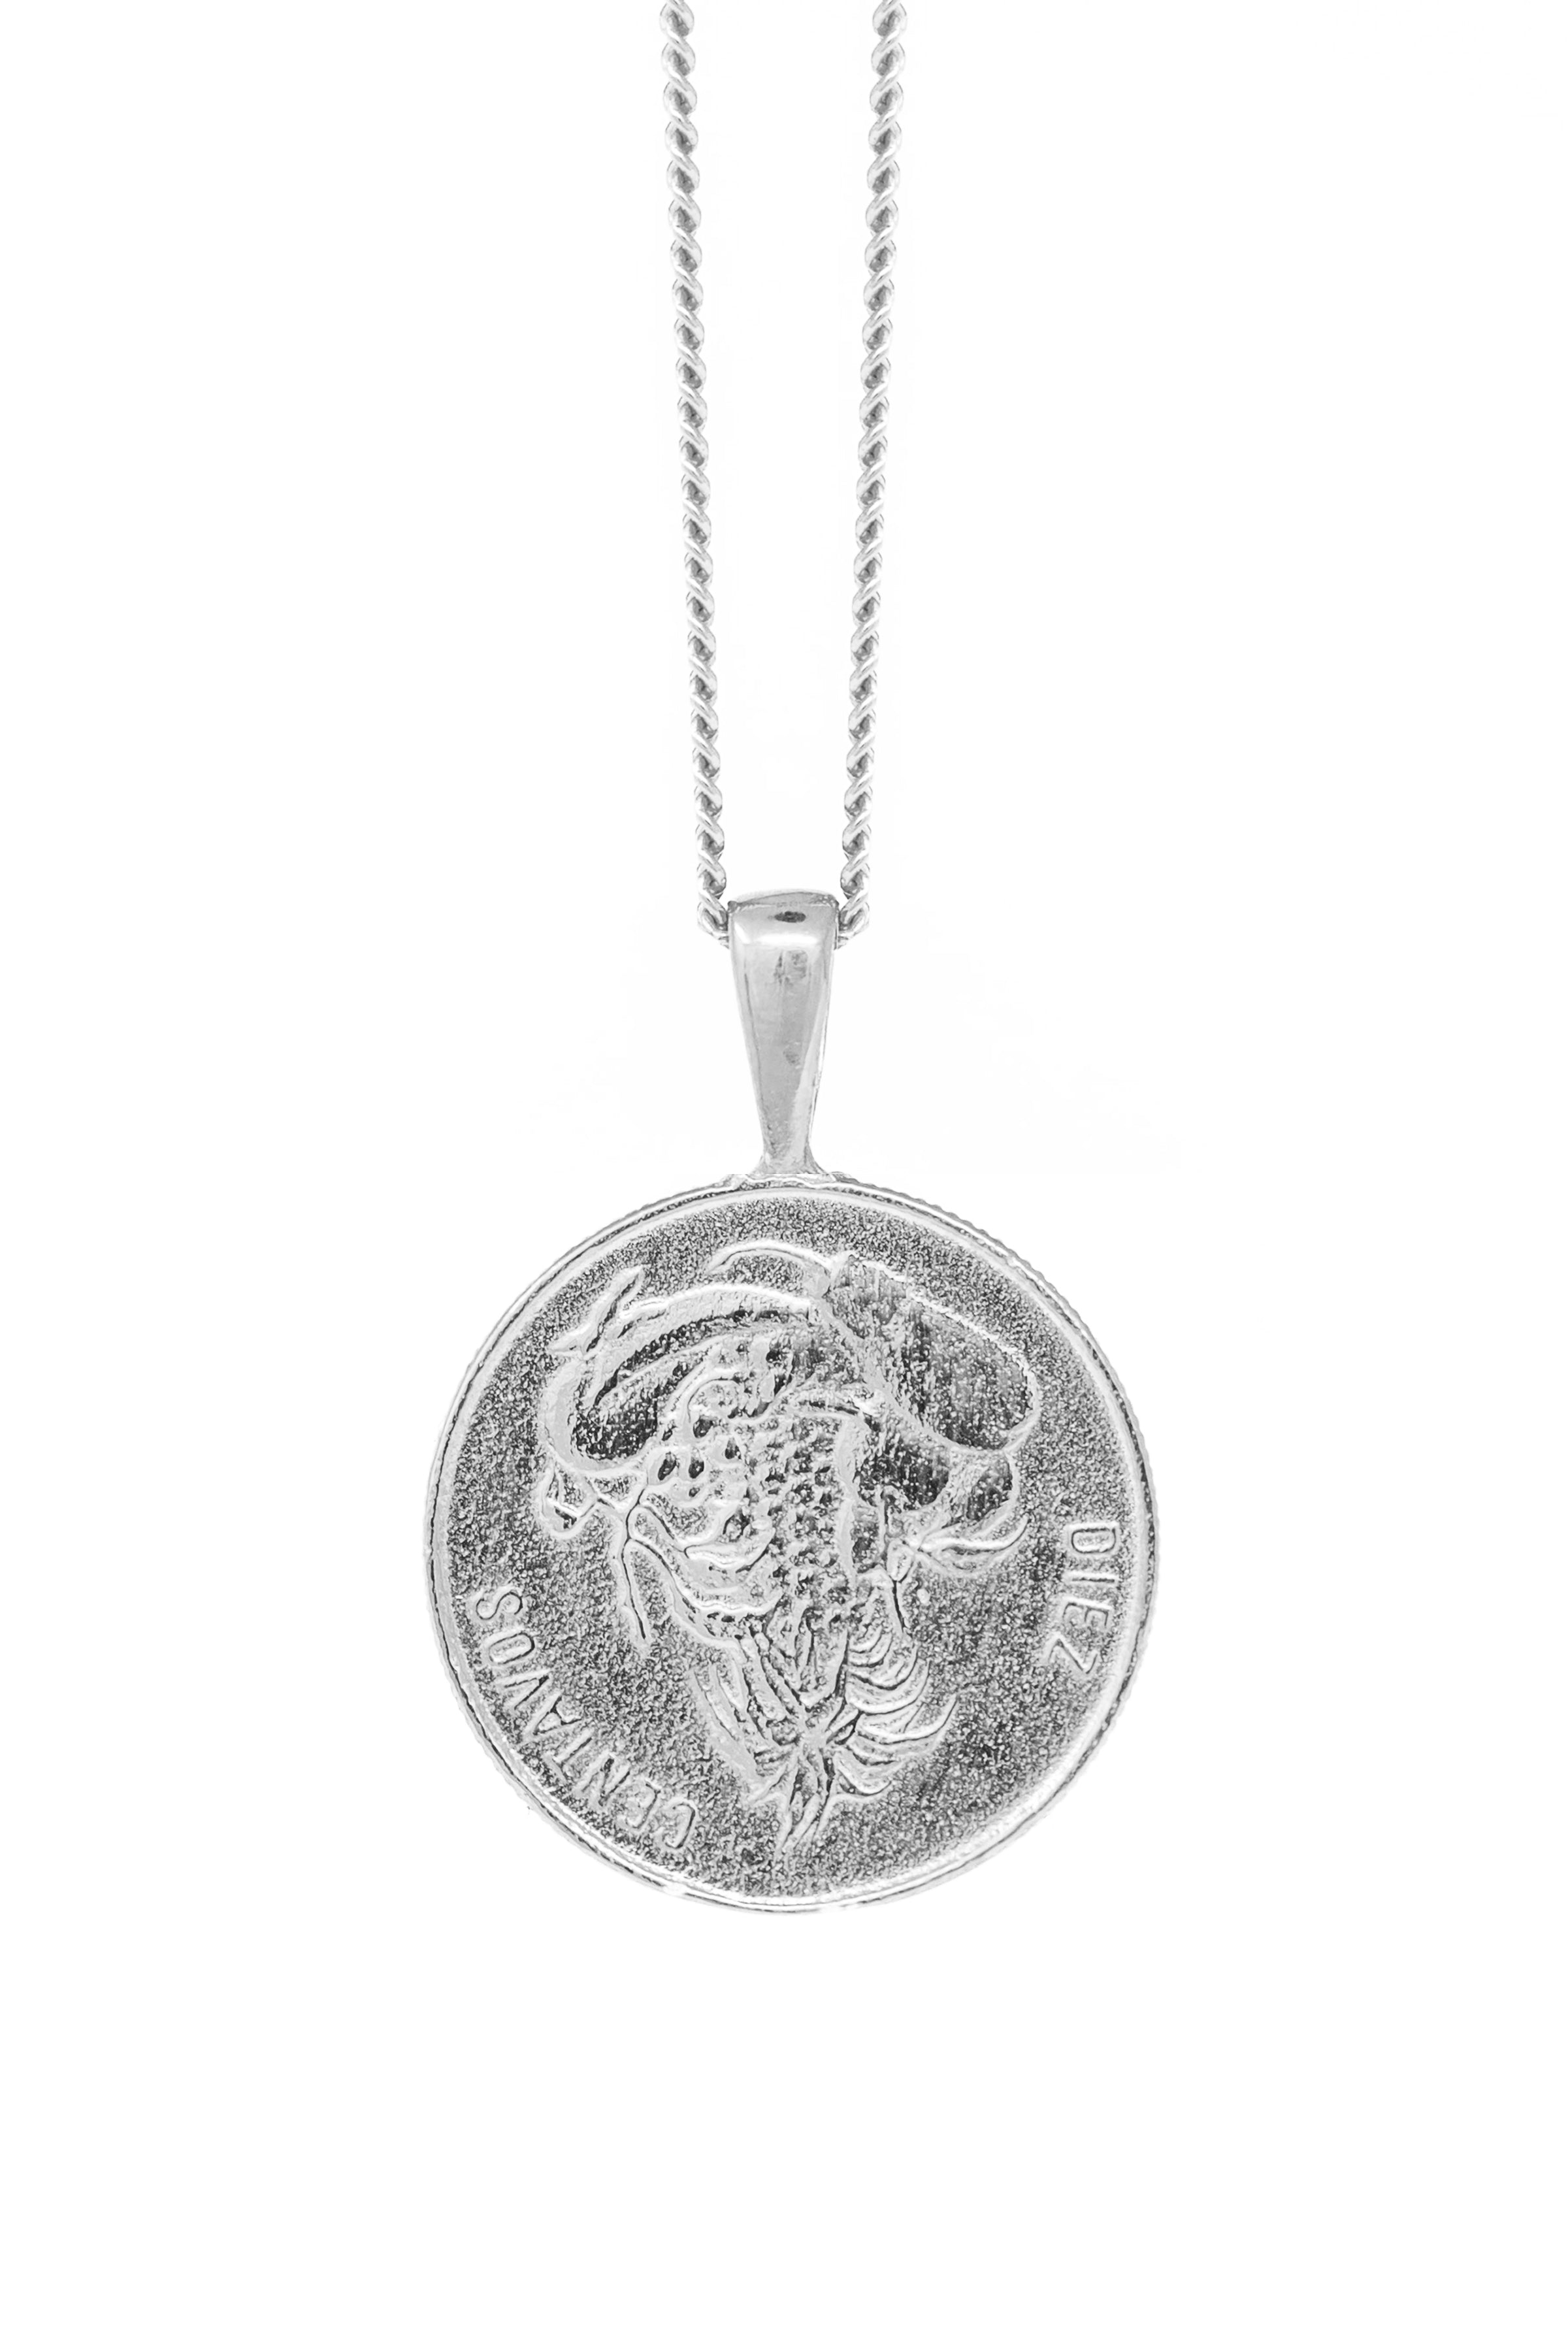 THE DOMINICAN Republic Coin Necklace